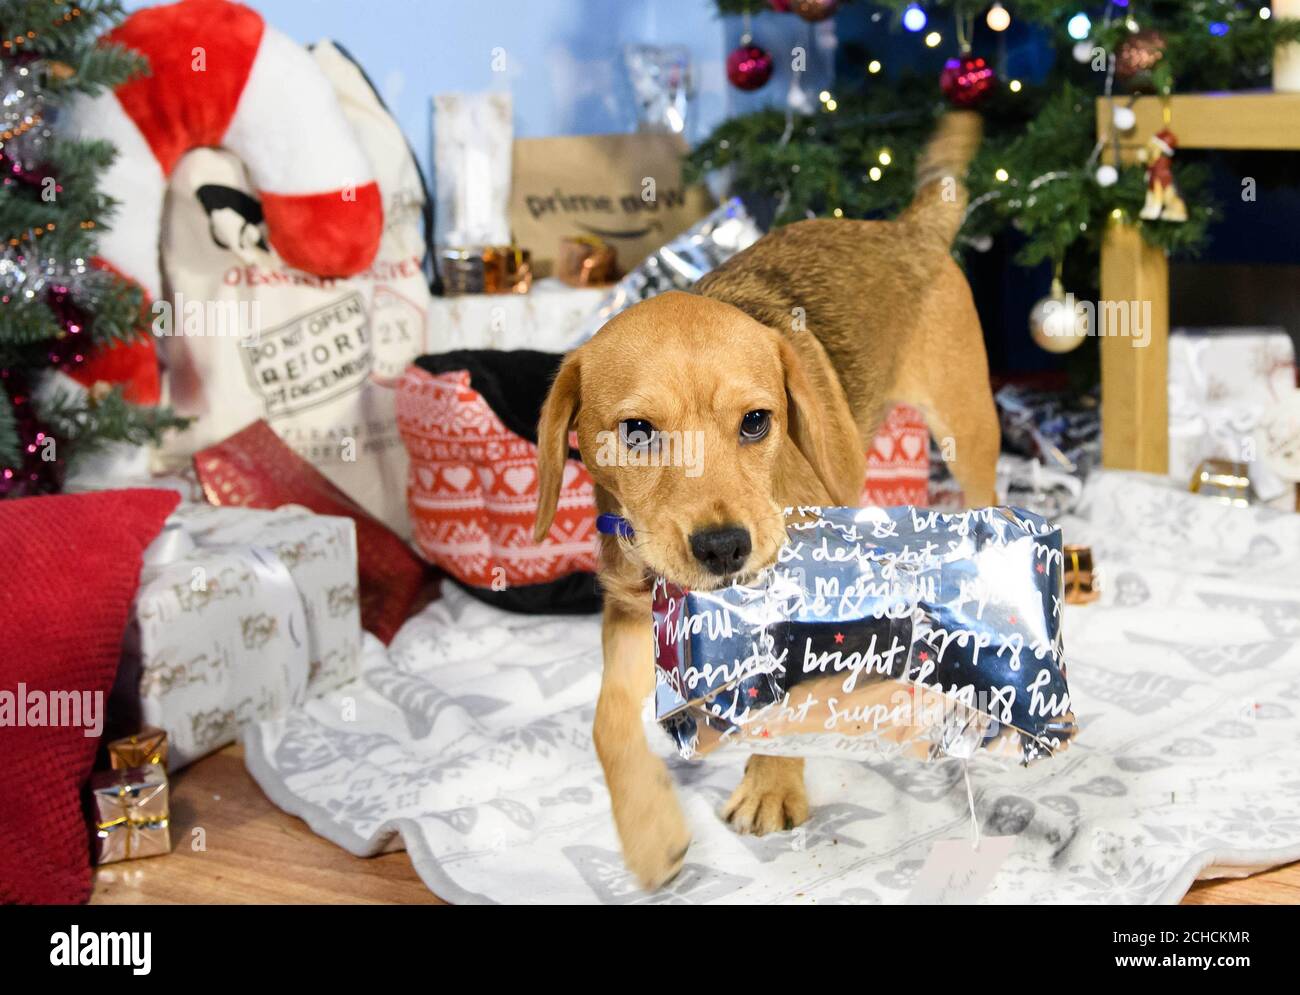 https://c8.alamy.com/comp/2CHCKMR/sandy-aged-9-months-a-rescued-mongrel-dog-receives-a-welcome-gift-at-battersea-dogs-cats-home-in-london-from-the-amazon-christmas-store-as-the-online-retailer-teams-up-with-the-charity-to-deliver-bestselling-pet-christmas-presents-to-its-residents-press-association-photo-issue-date-15-december-2017-photo-credit-should-read-jonathan-hordlepa-wire-2CHCKMR.jpg